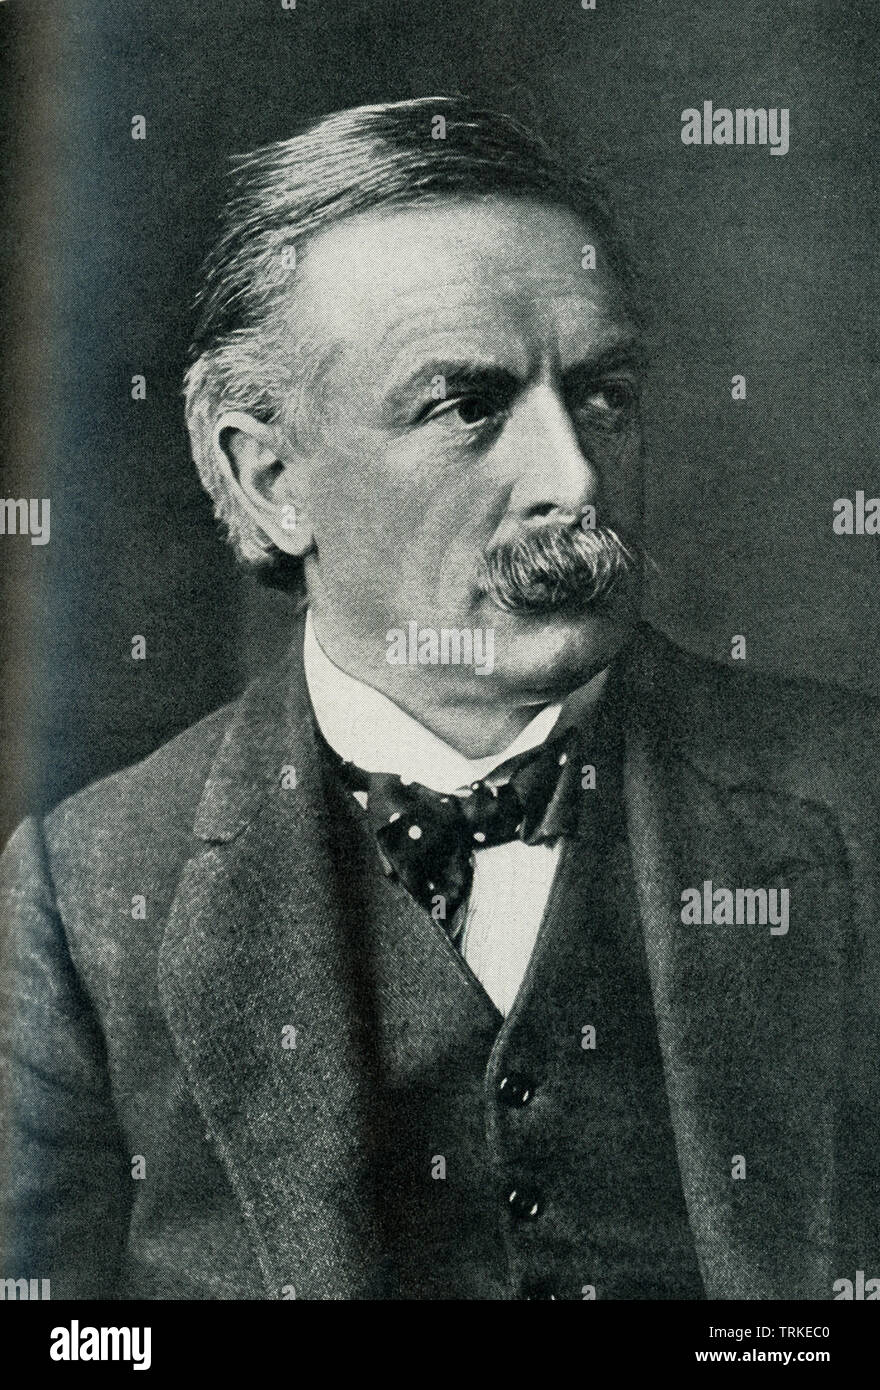 The photo dates to 1922. The caption reads: The Right Hon. David Lloyd George. Who became Prime Minister of England, December 6, 1916. His work during the war was of great importance, first as Chancellor of the Exchequer, and then Minister of Munitions, and after the death of Kitchner as Minister of War. Stock Photo